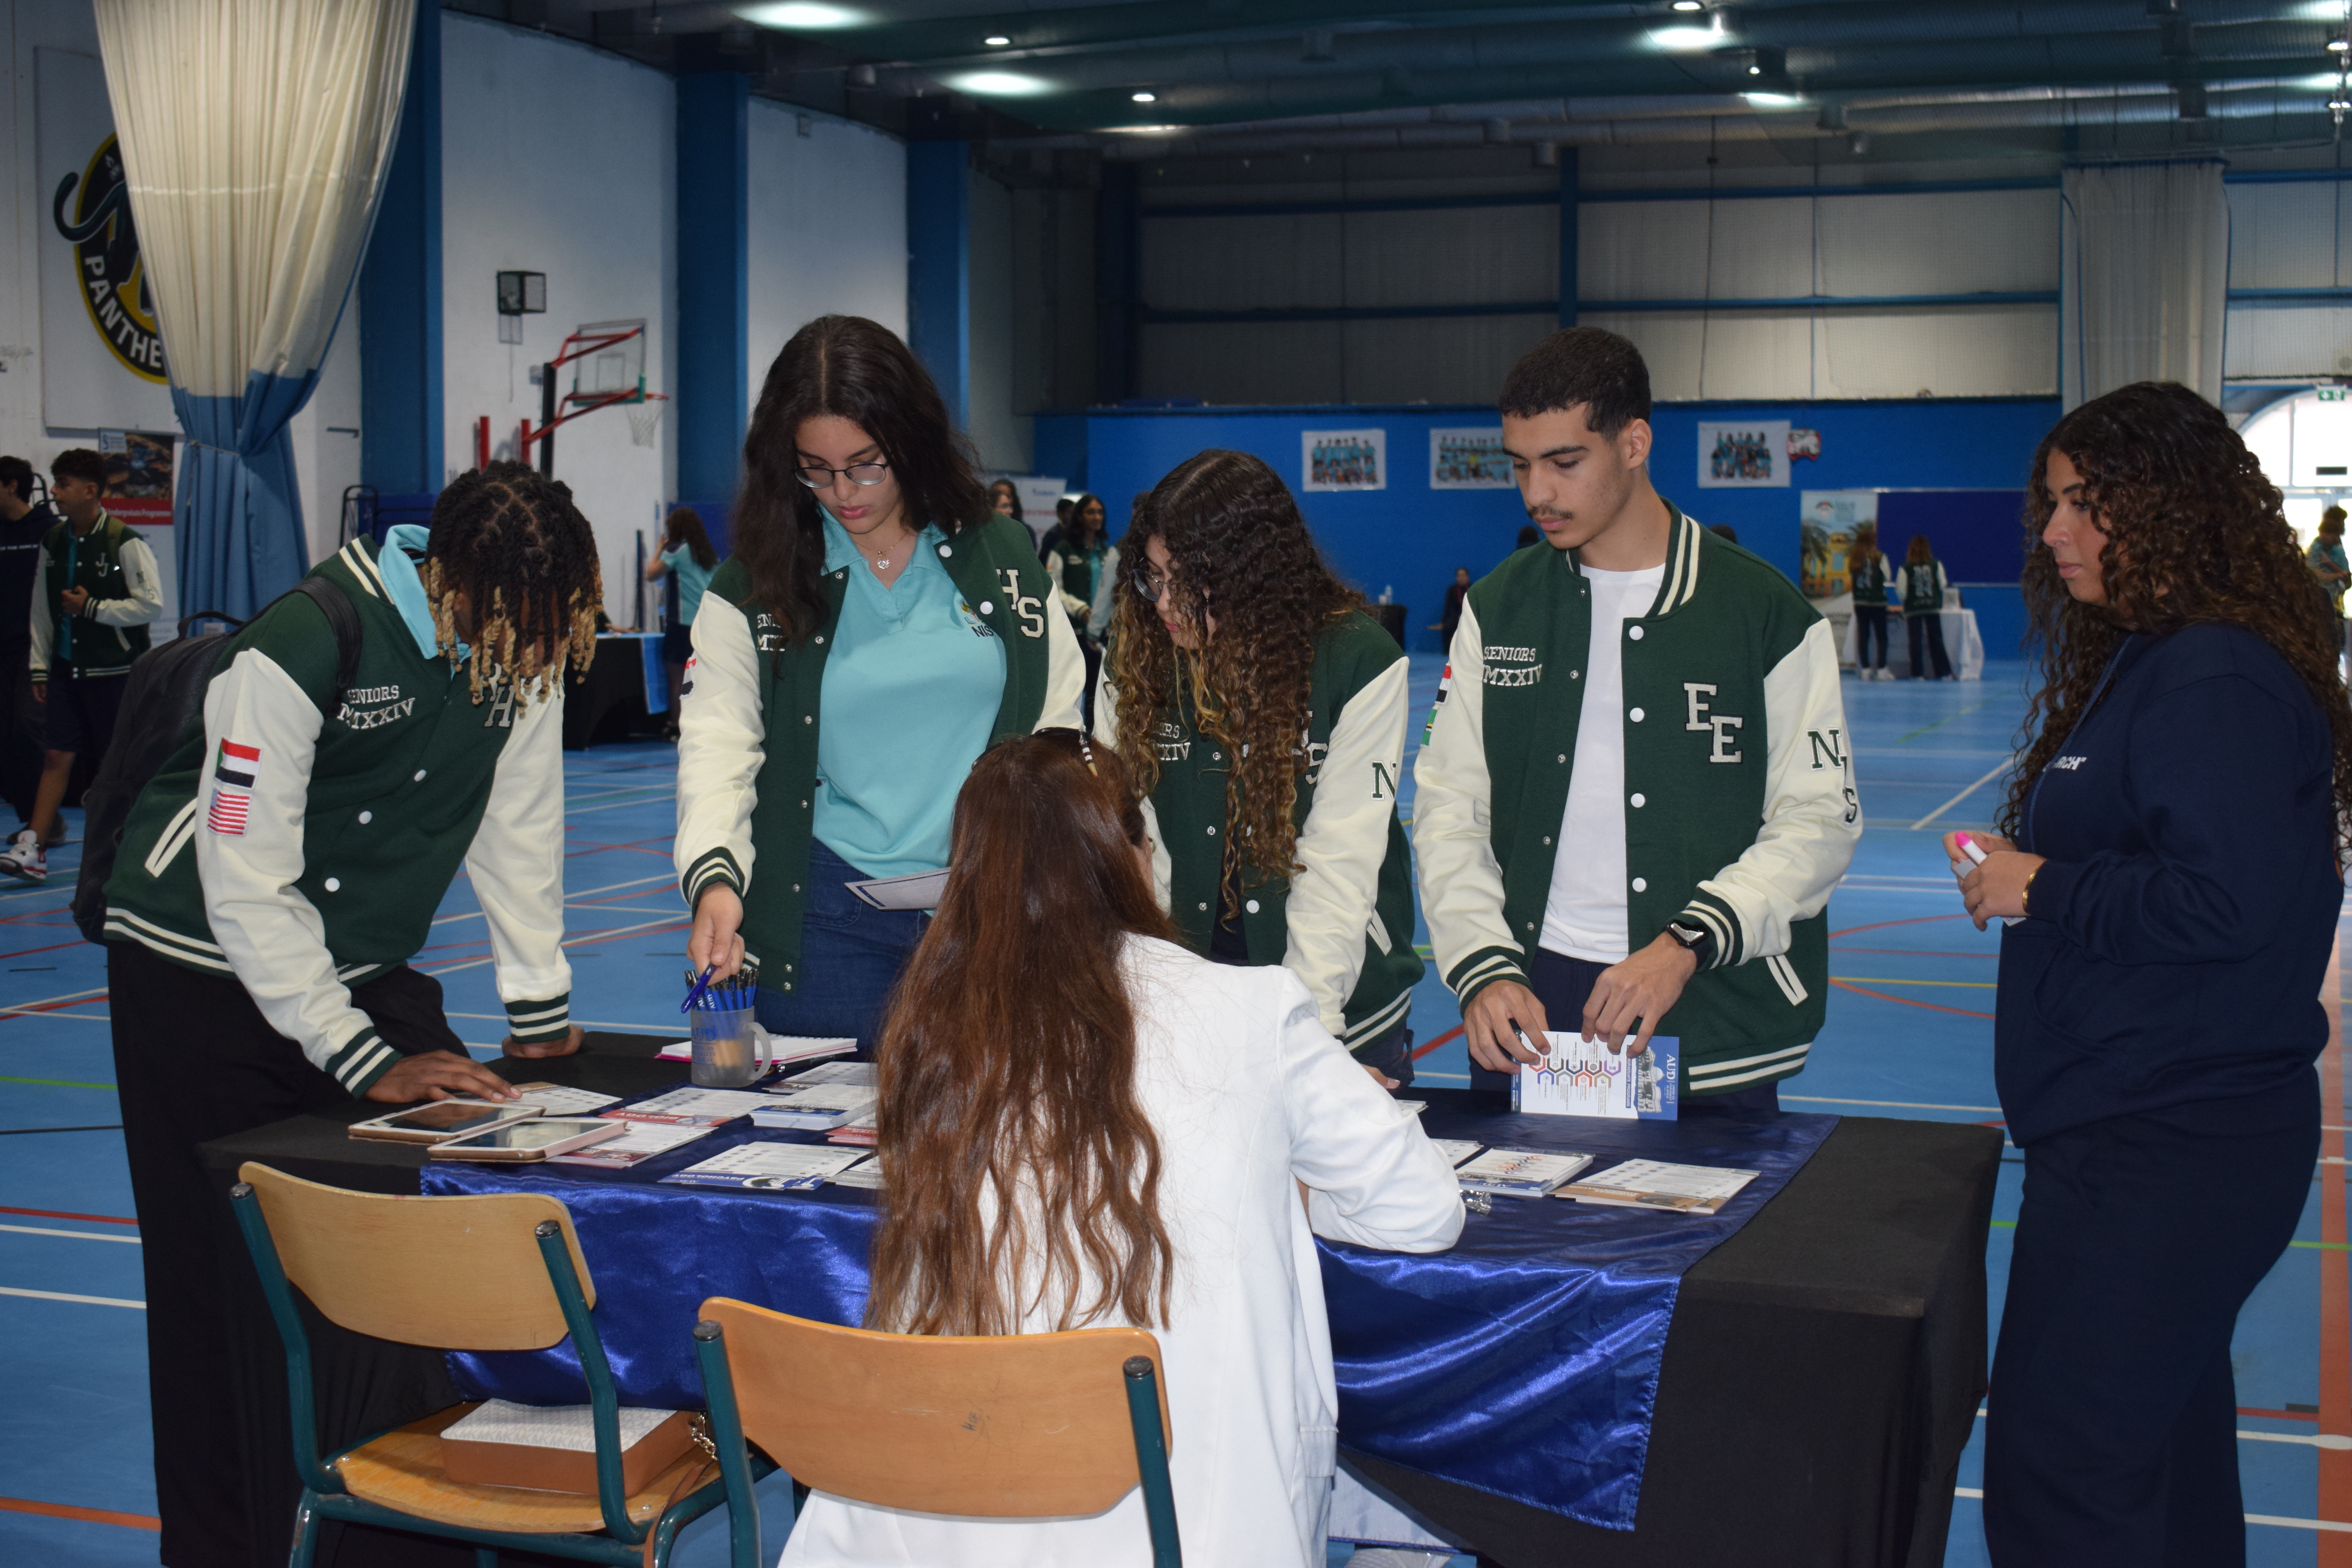 NIS Holds University Fair for High School Students